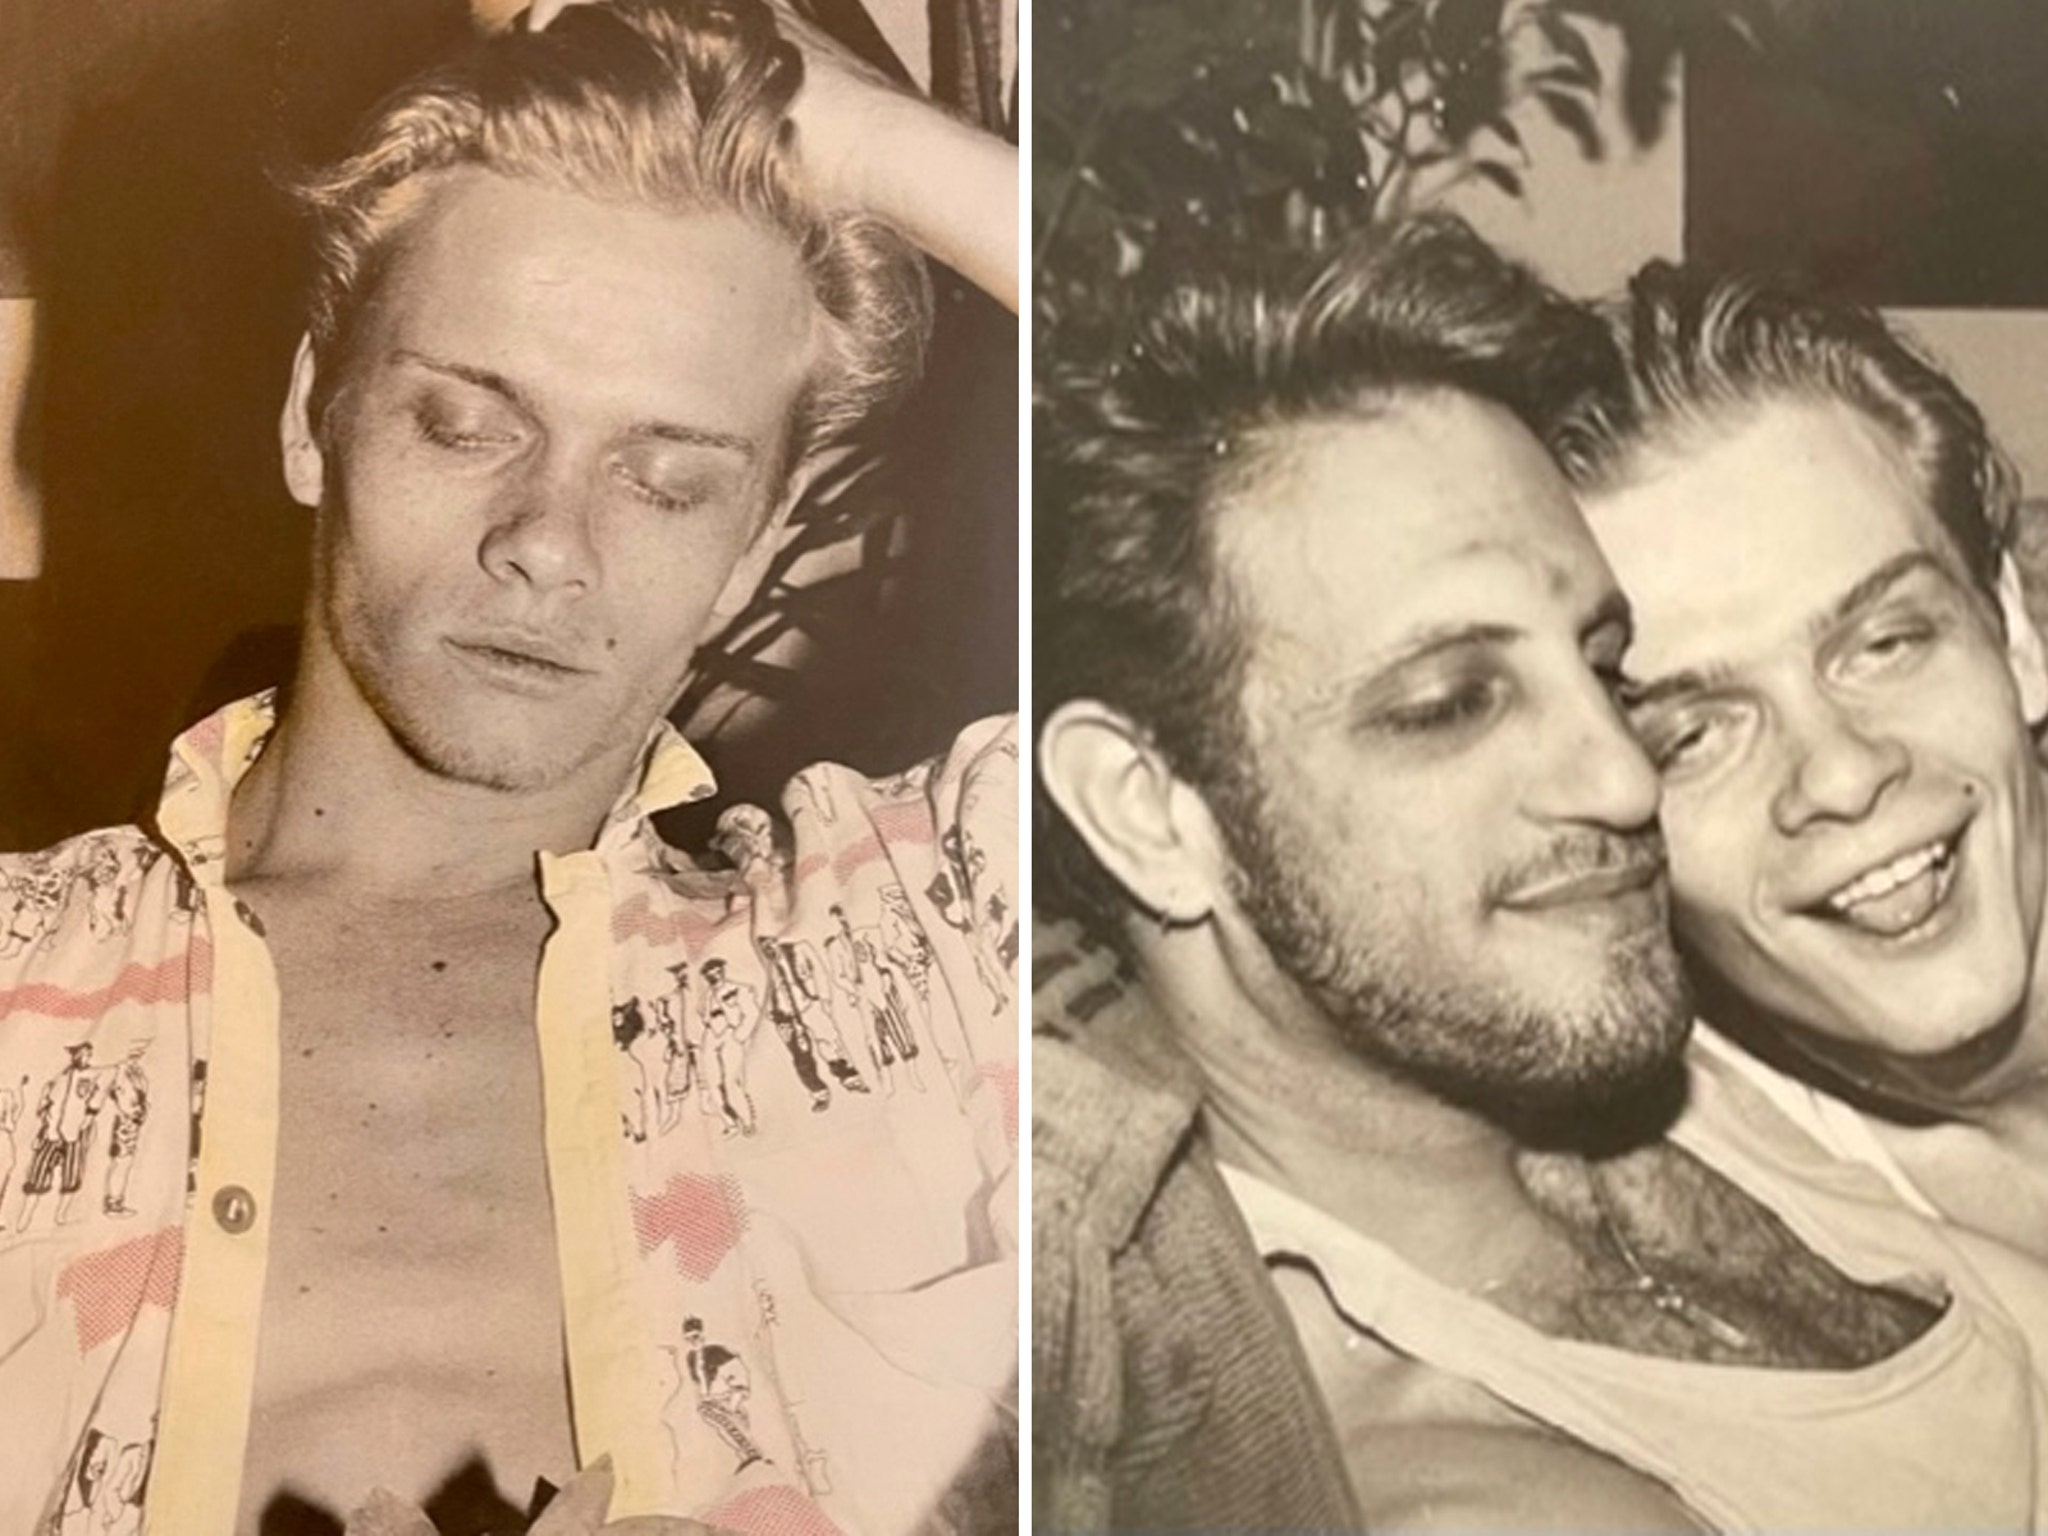 Gay Porn Star Billy Newtons Brutal Murder Solved Thanks to Amateur Sleuths 32 Years Later image